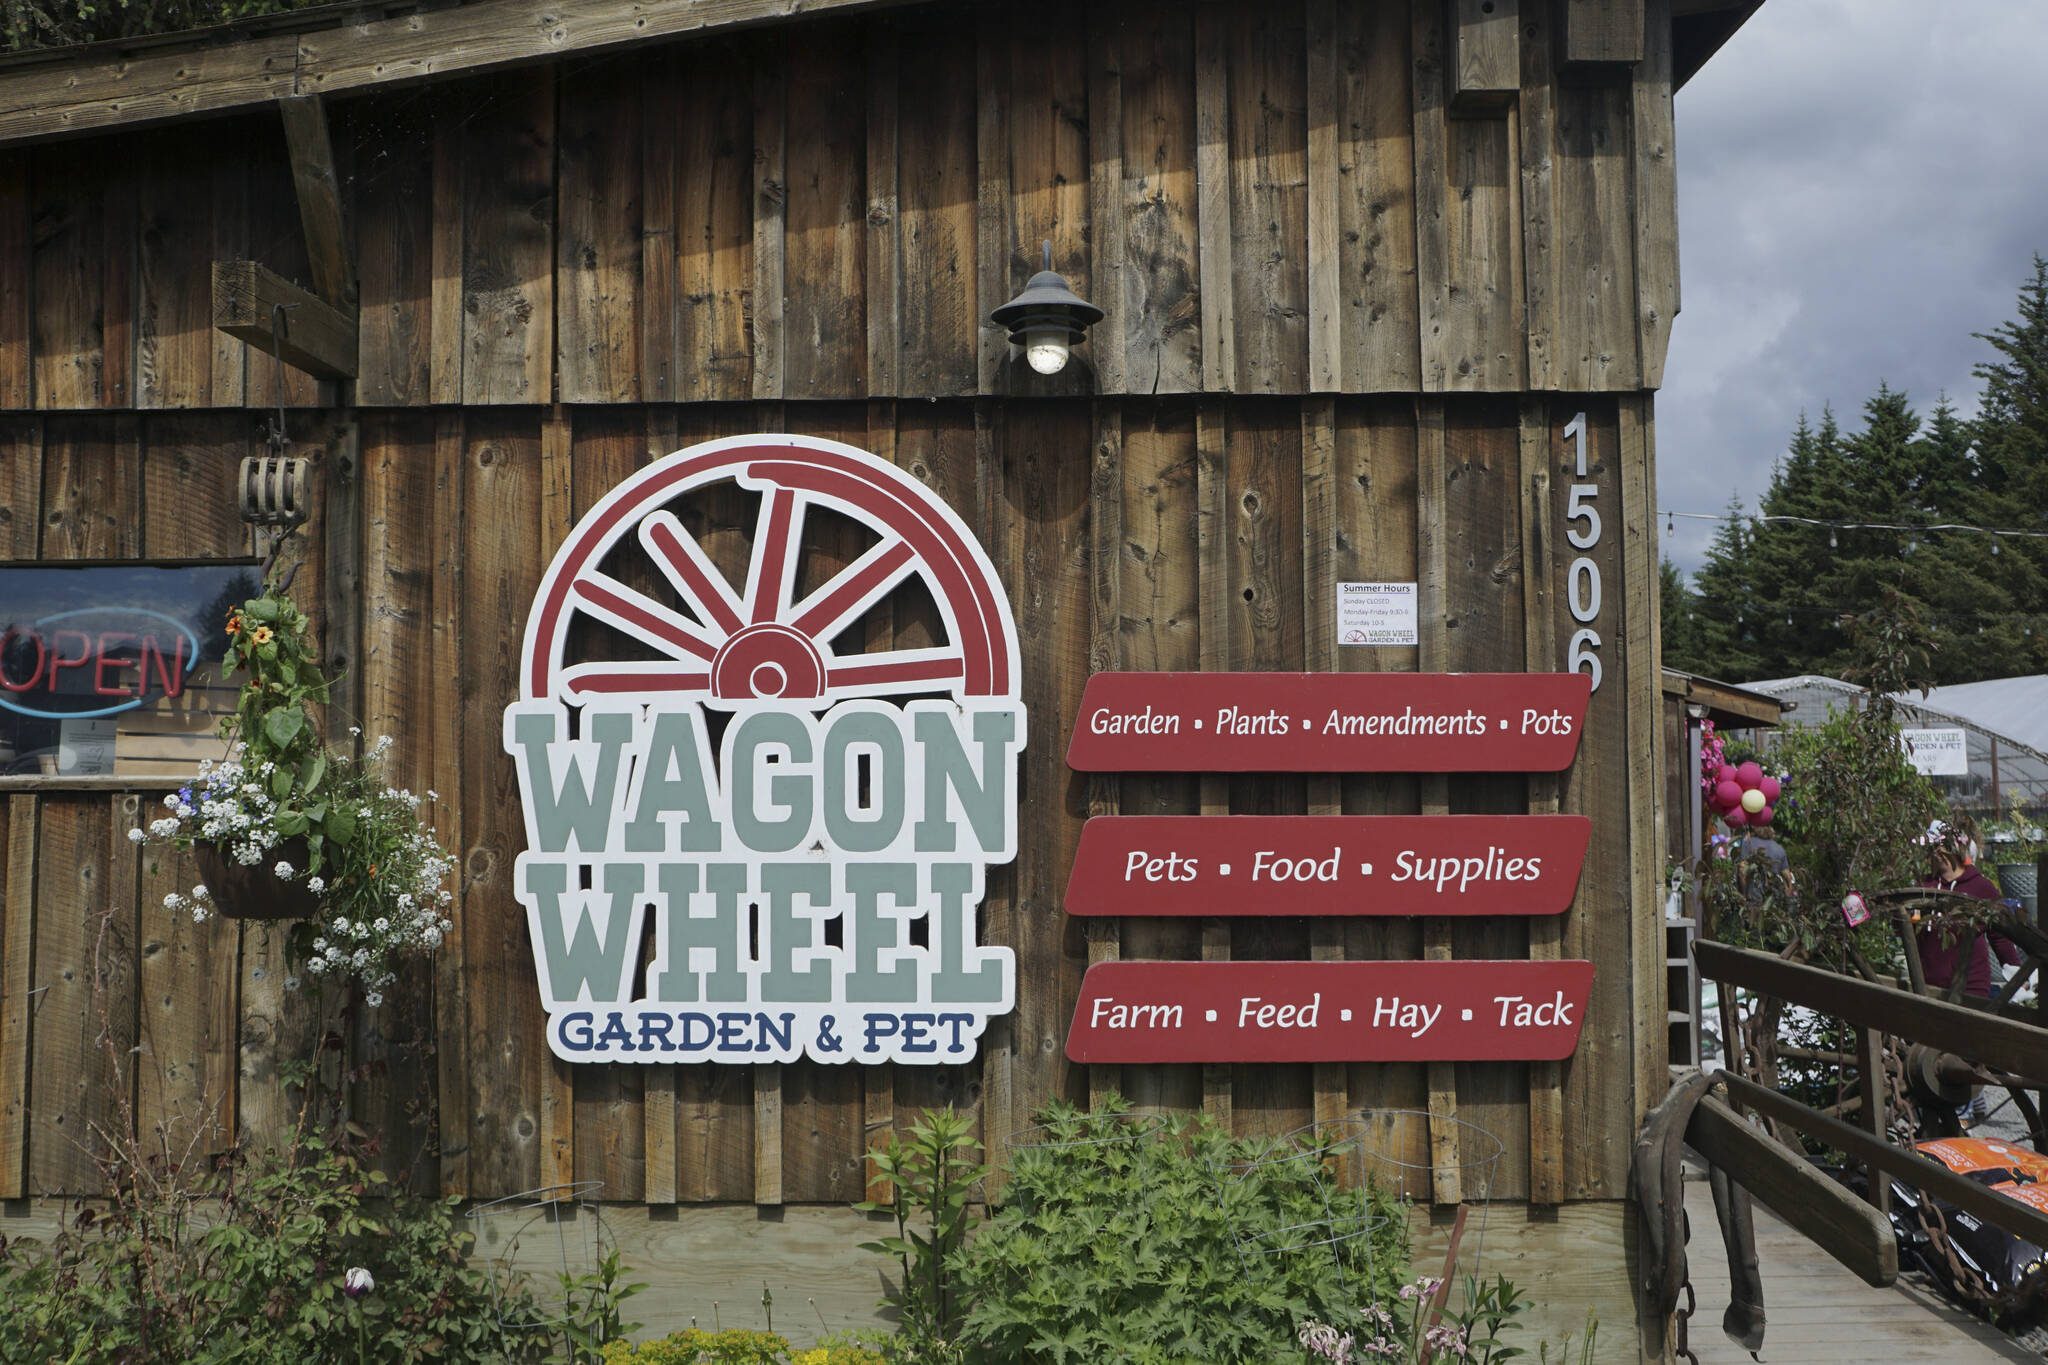 The sign for Wagon Wheel Garden & Pet on its 50th anniversary celebration on Friday, June 10, 2022, in Homer, Alaska. (Photo by Michael Armstrong/Homer News)